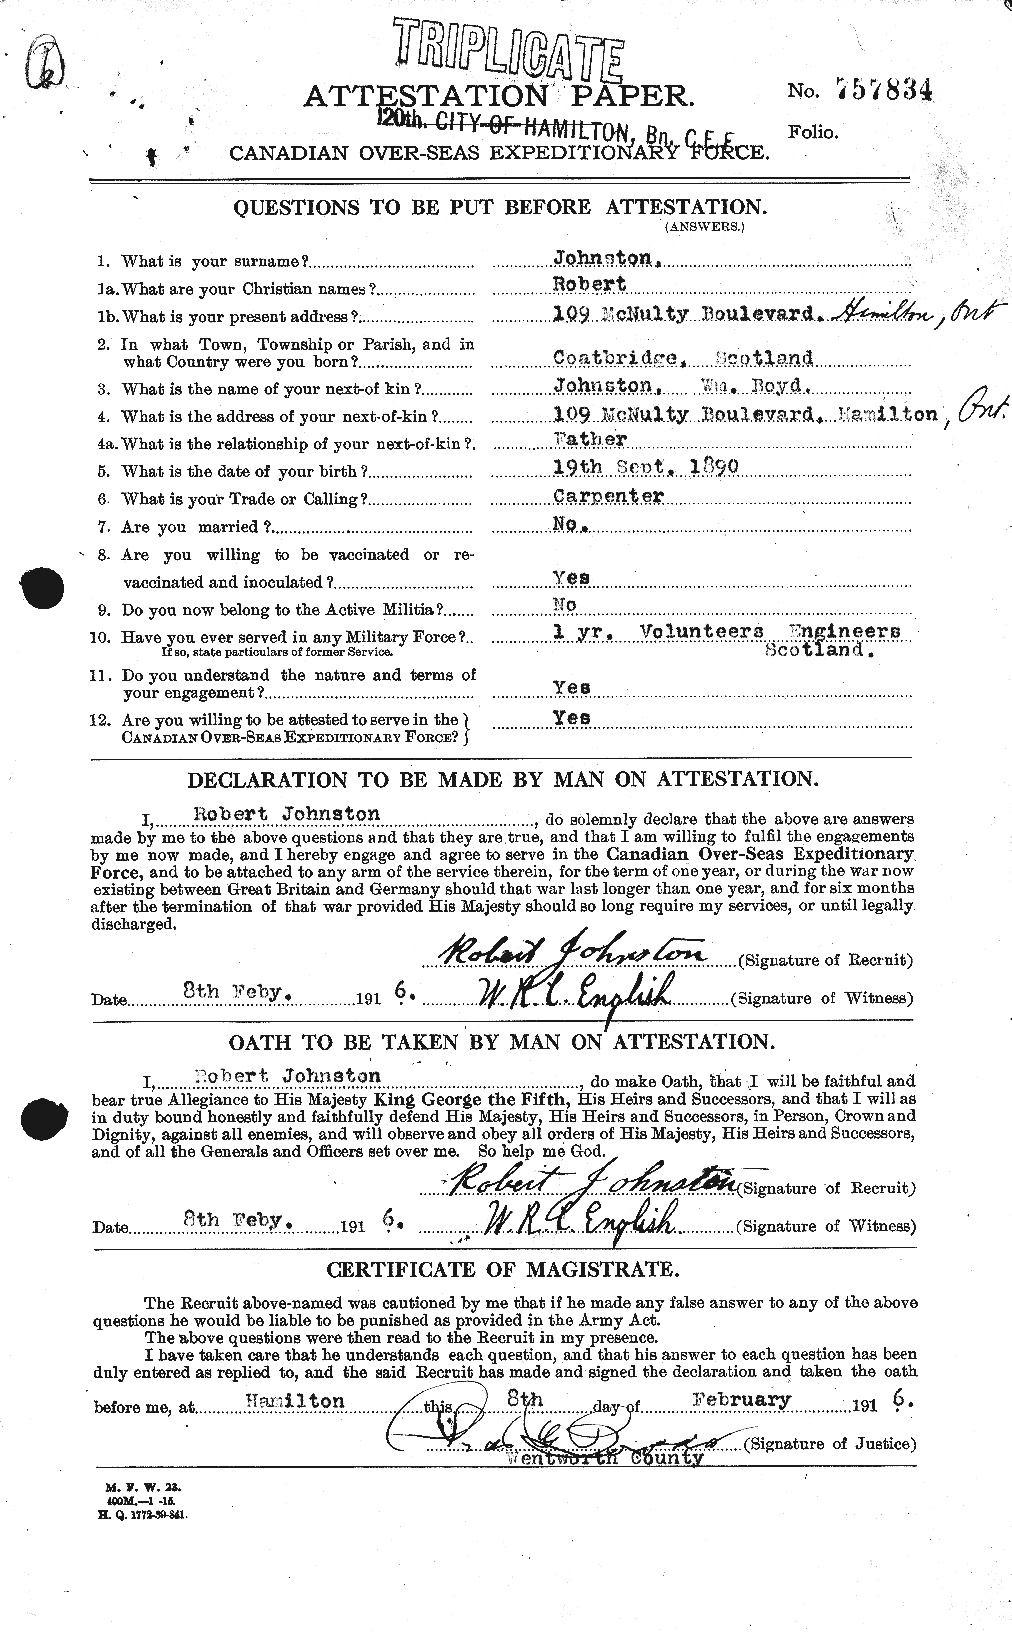 Personnel Records of the First World War - CEF 426982a